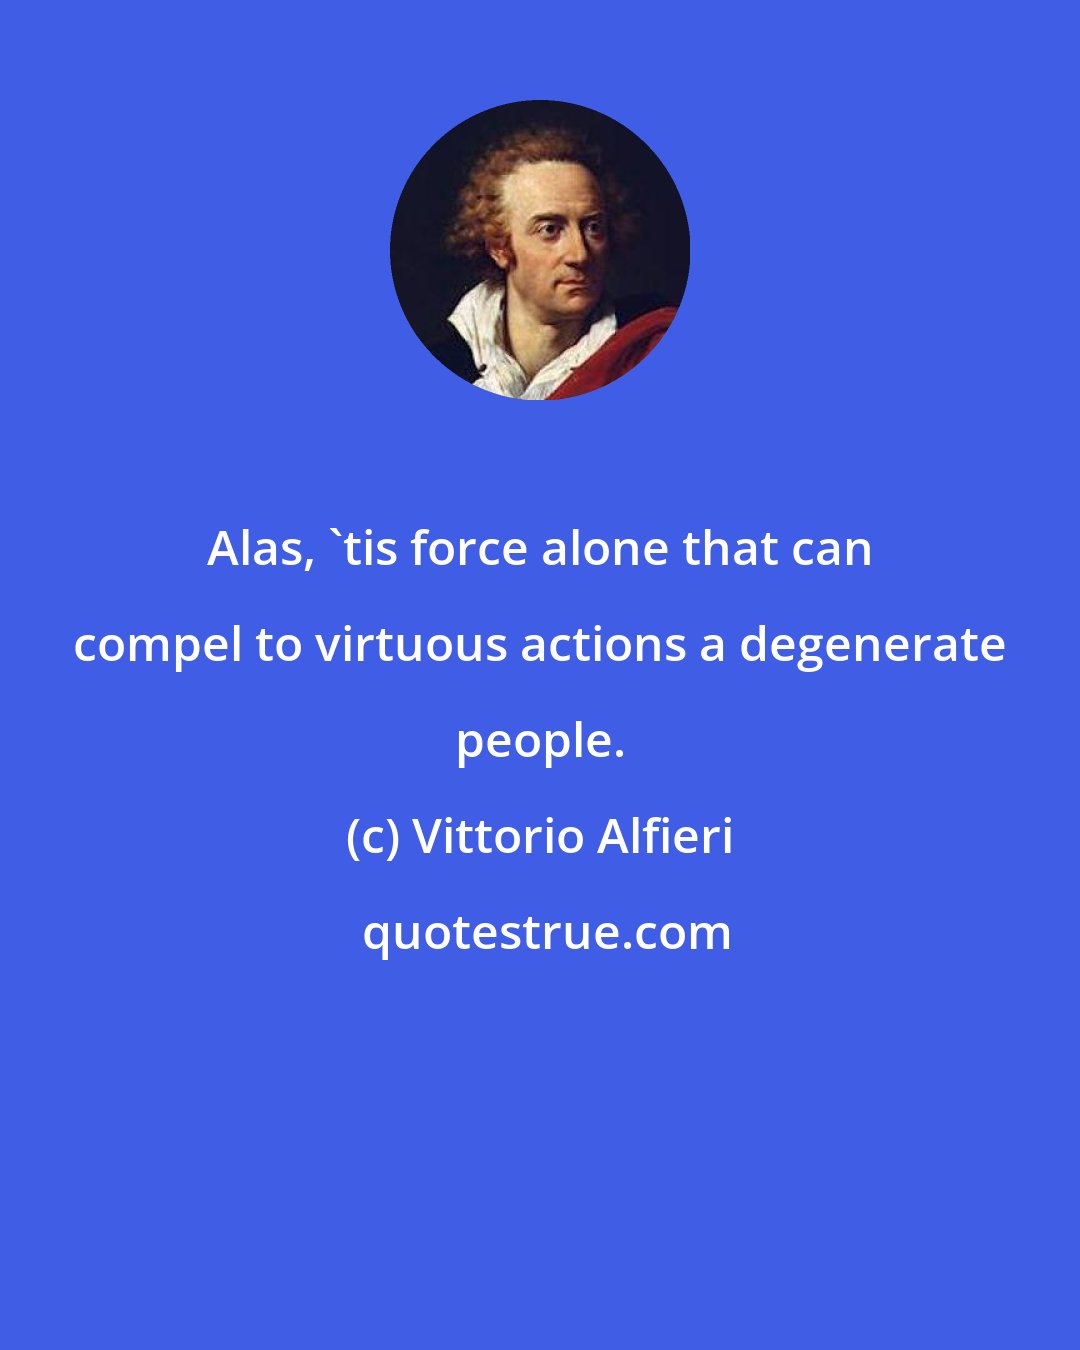 Vittorio Alfieri: Alas, 'tis force alone that can compel to virtuous actions a degenerate people.